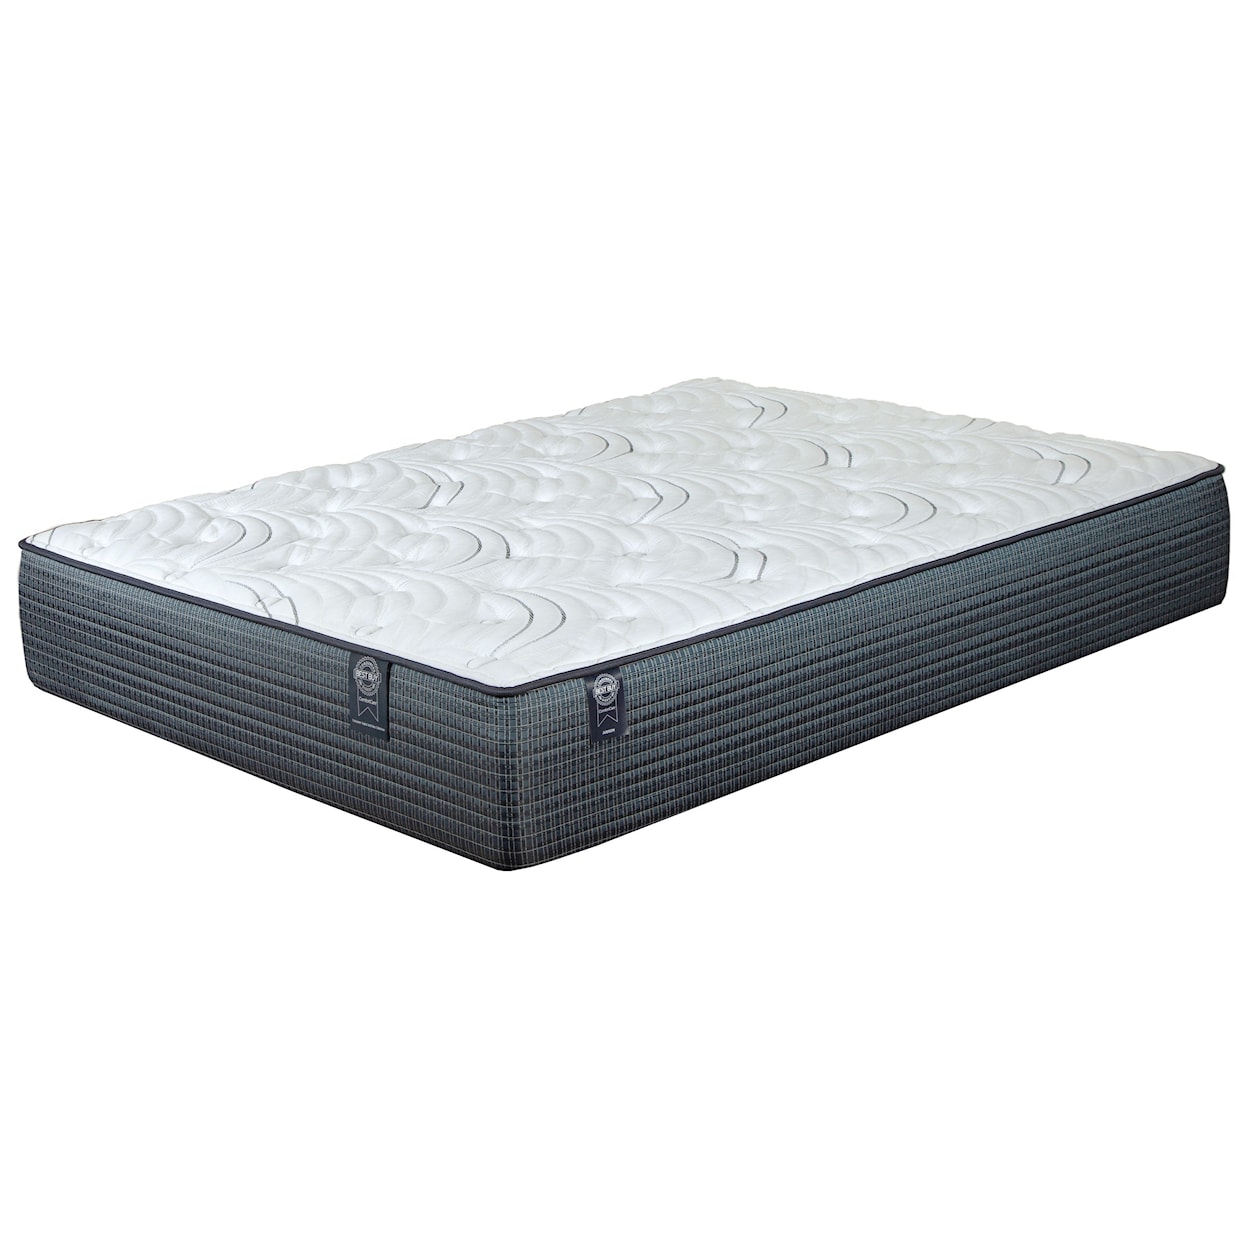 Restonic Integrity Plush Queen Plush Pocketed Coil Mattress